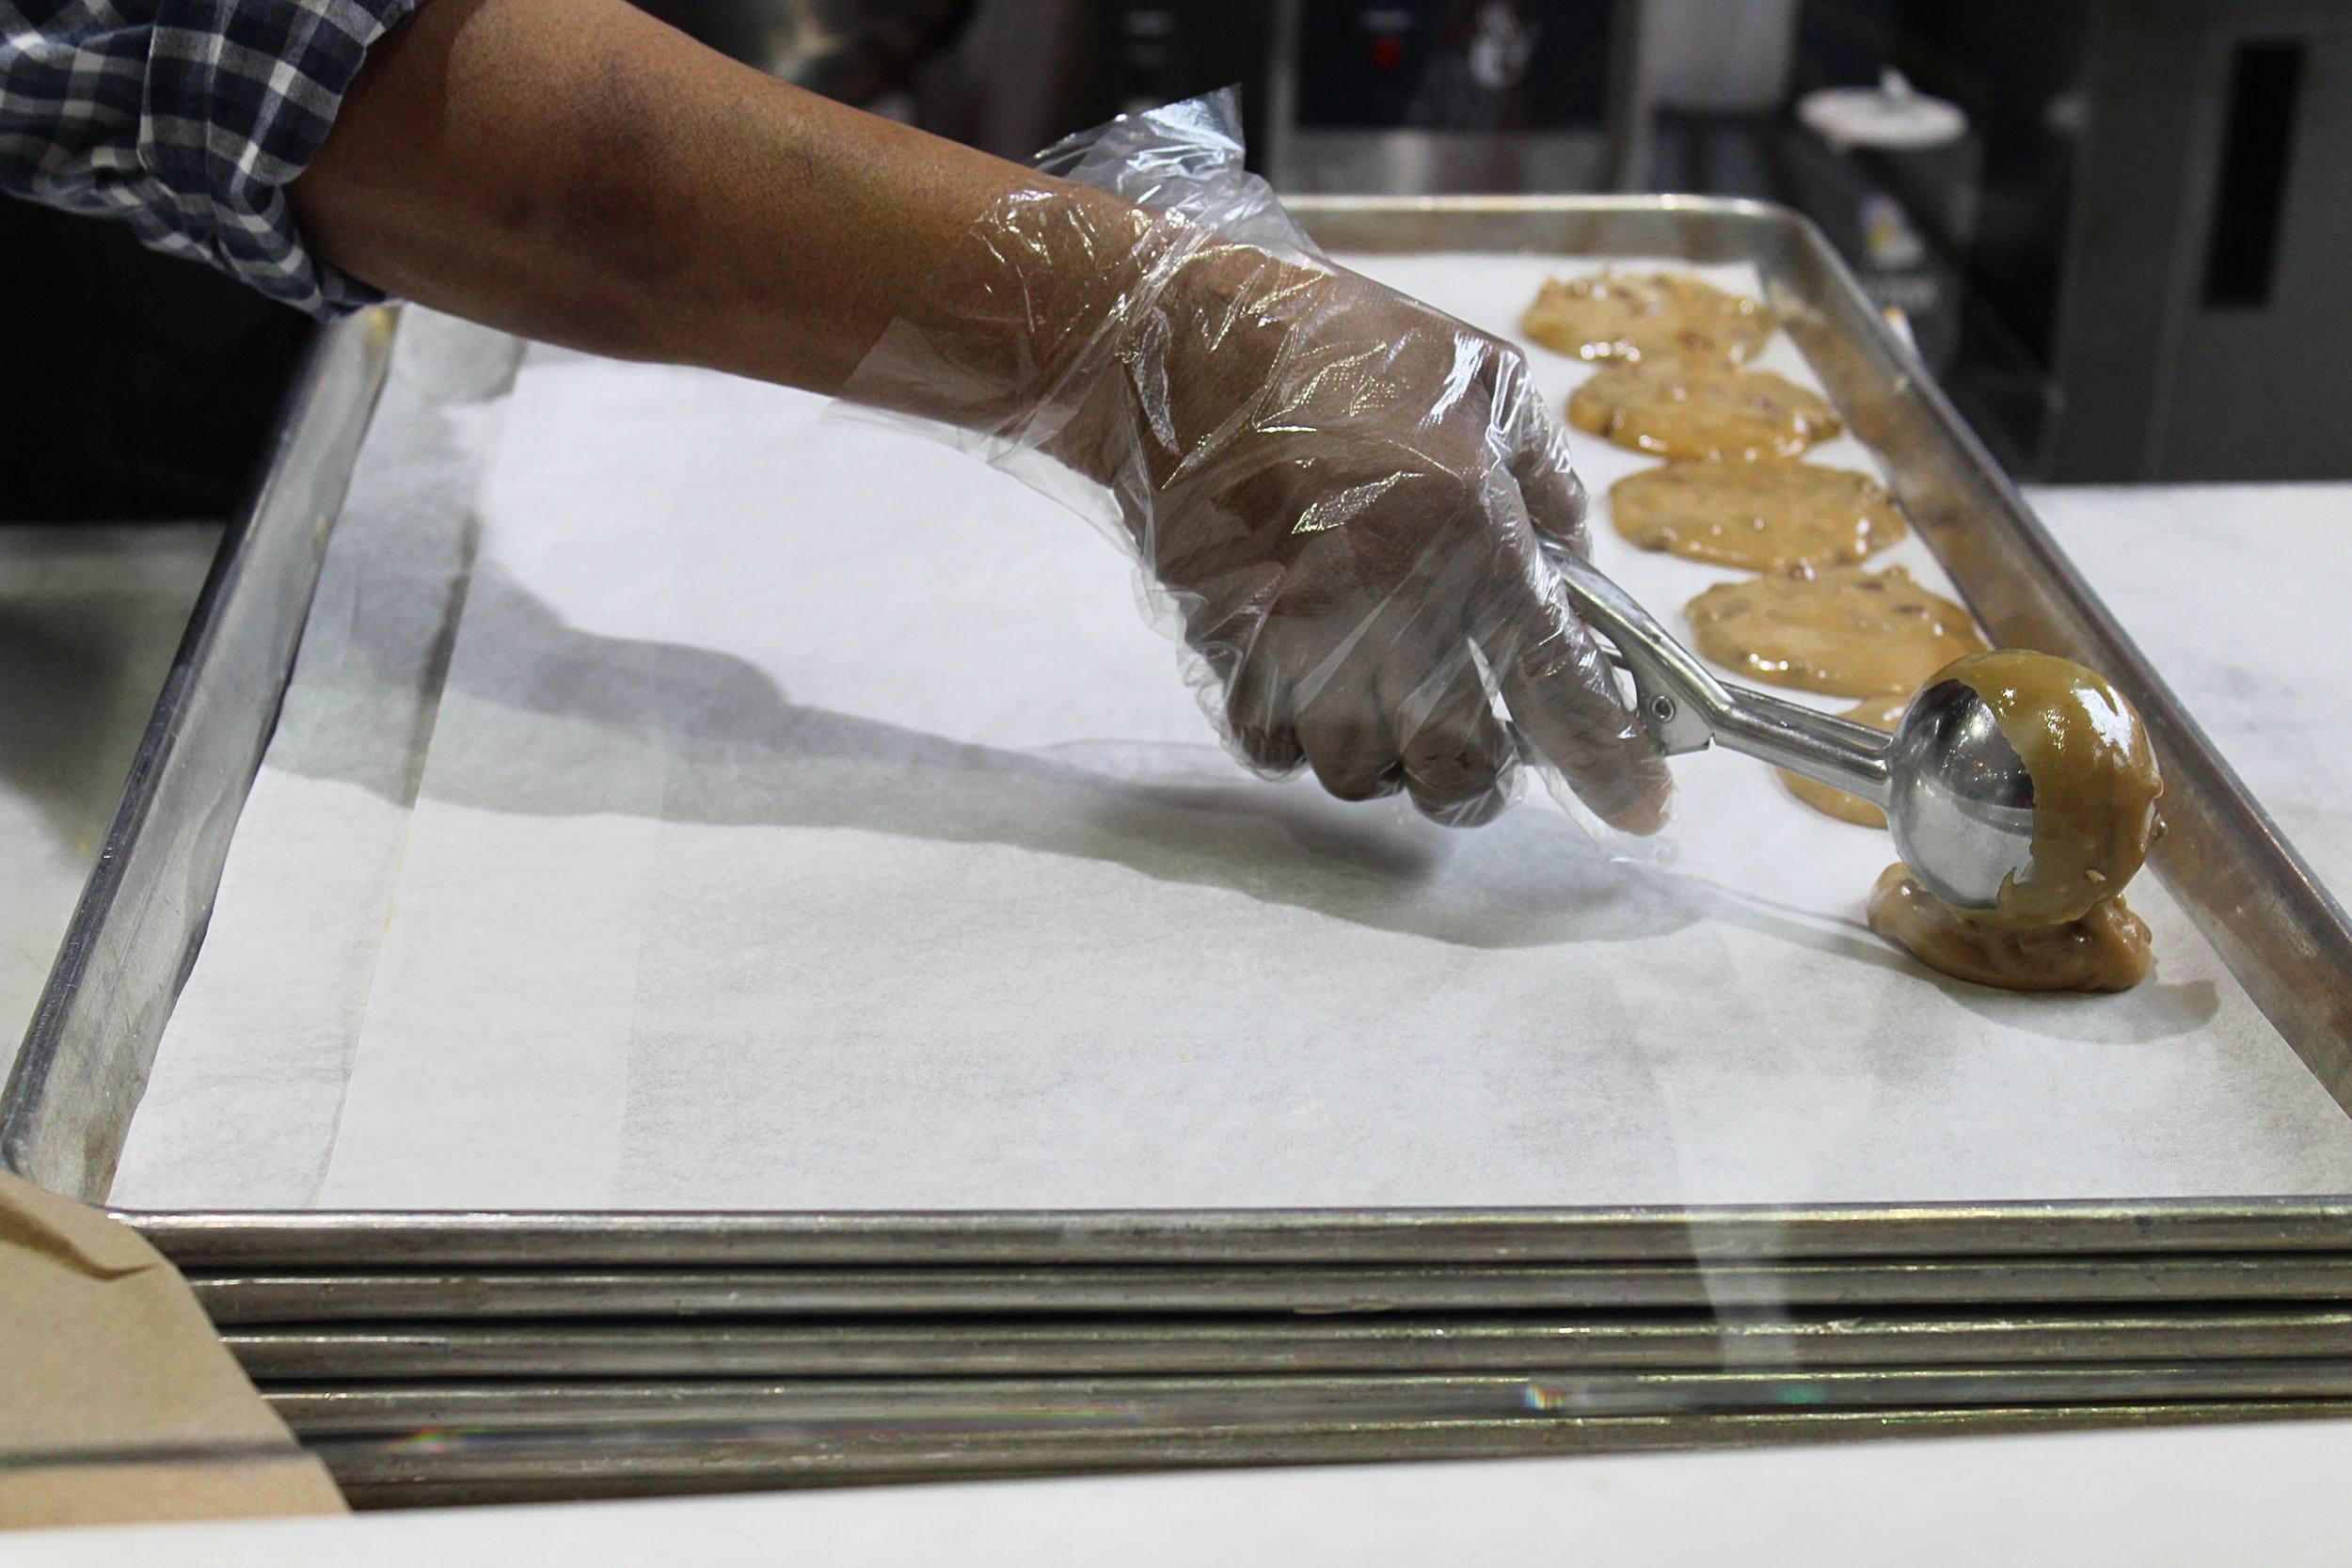 Making Pralines in New Orleans